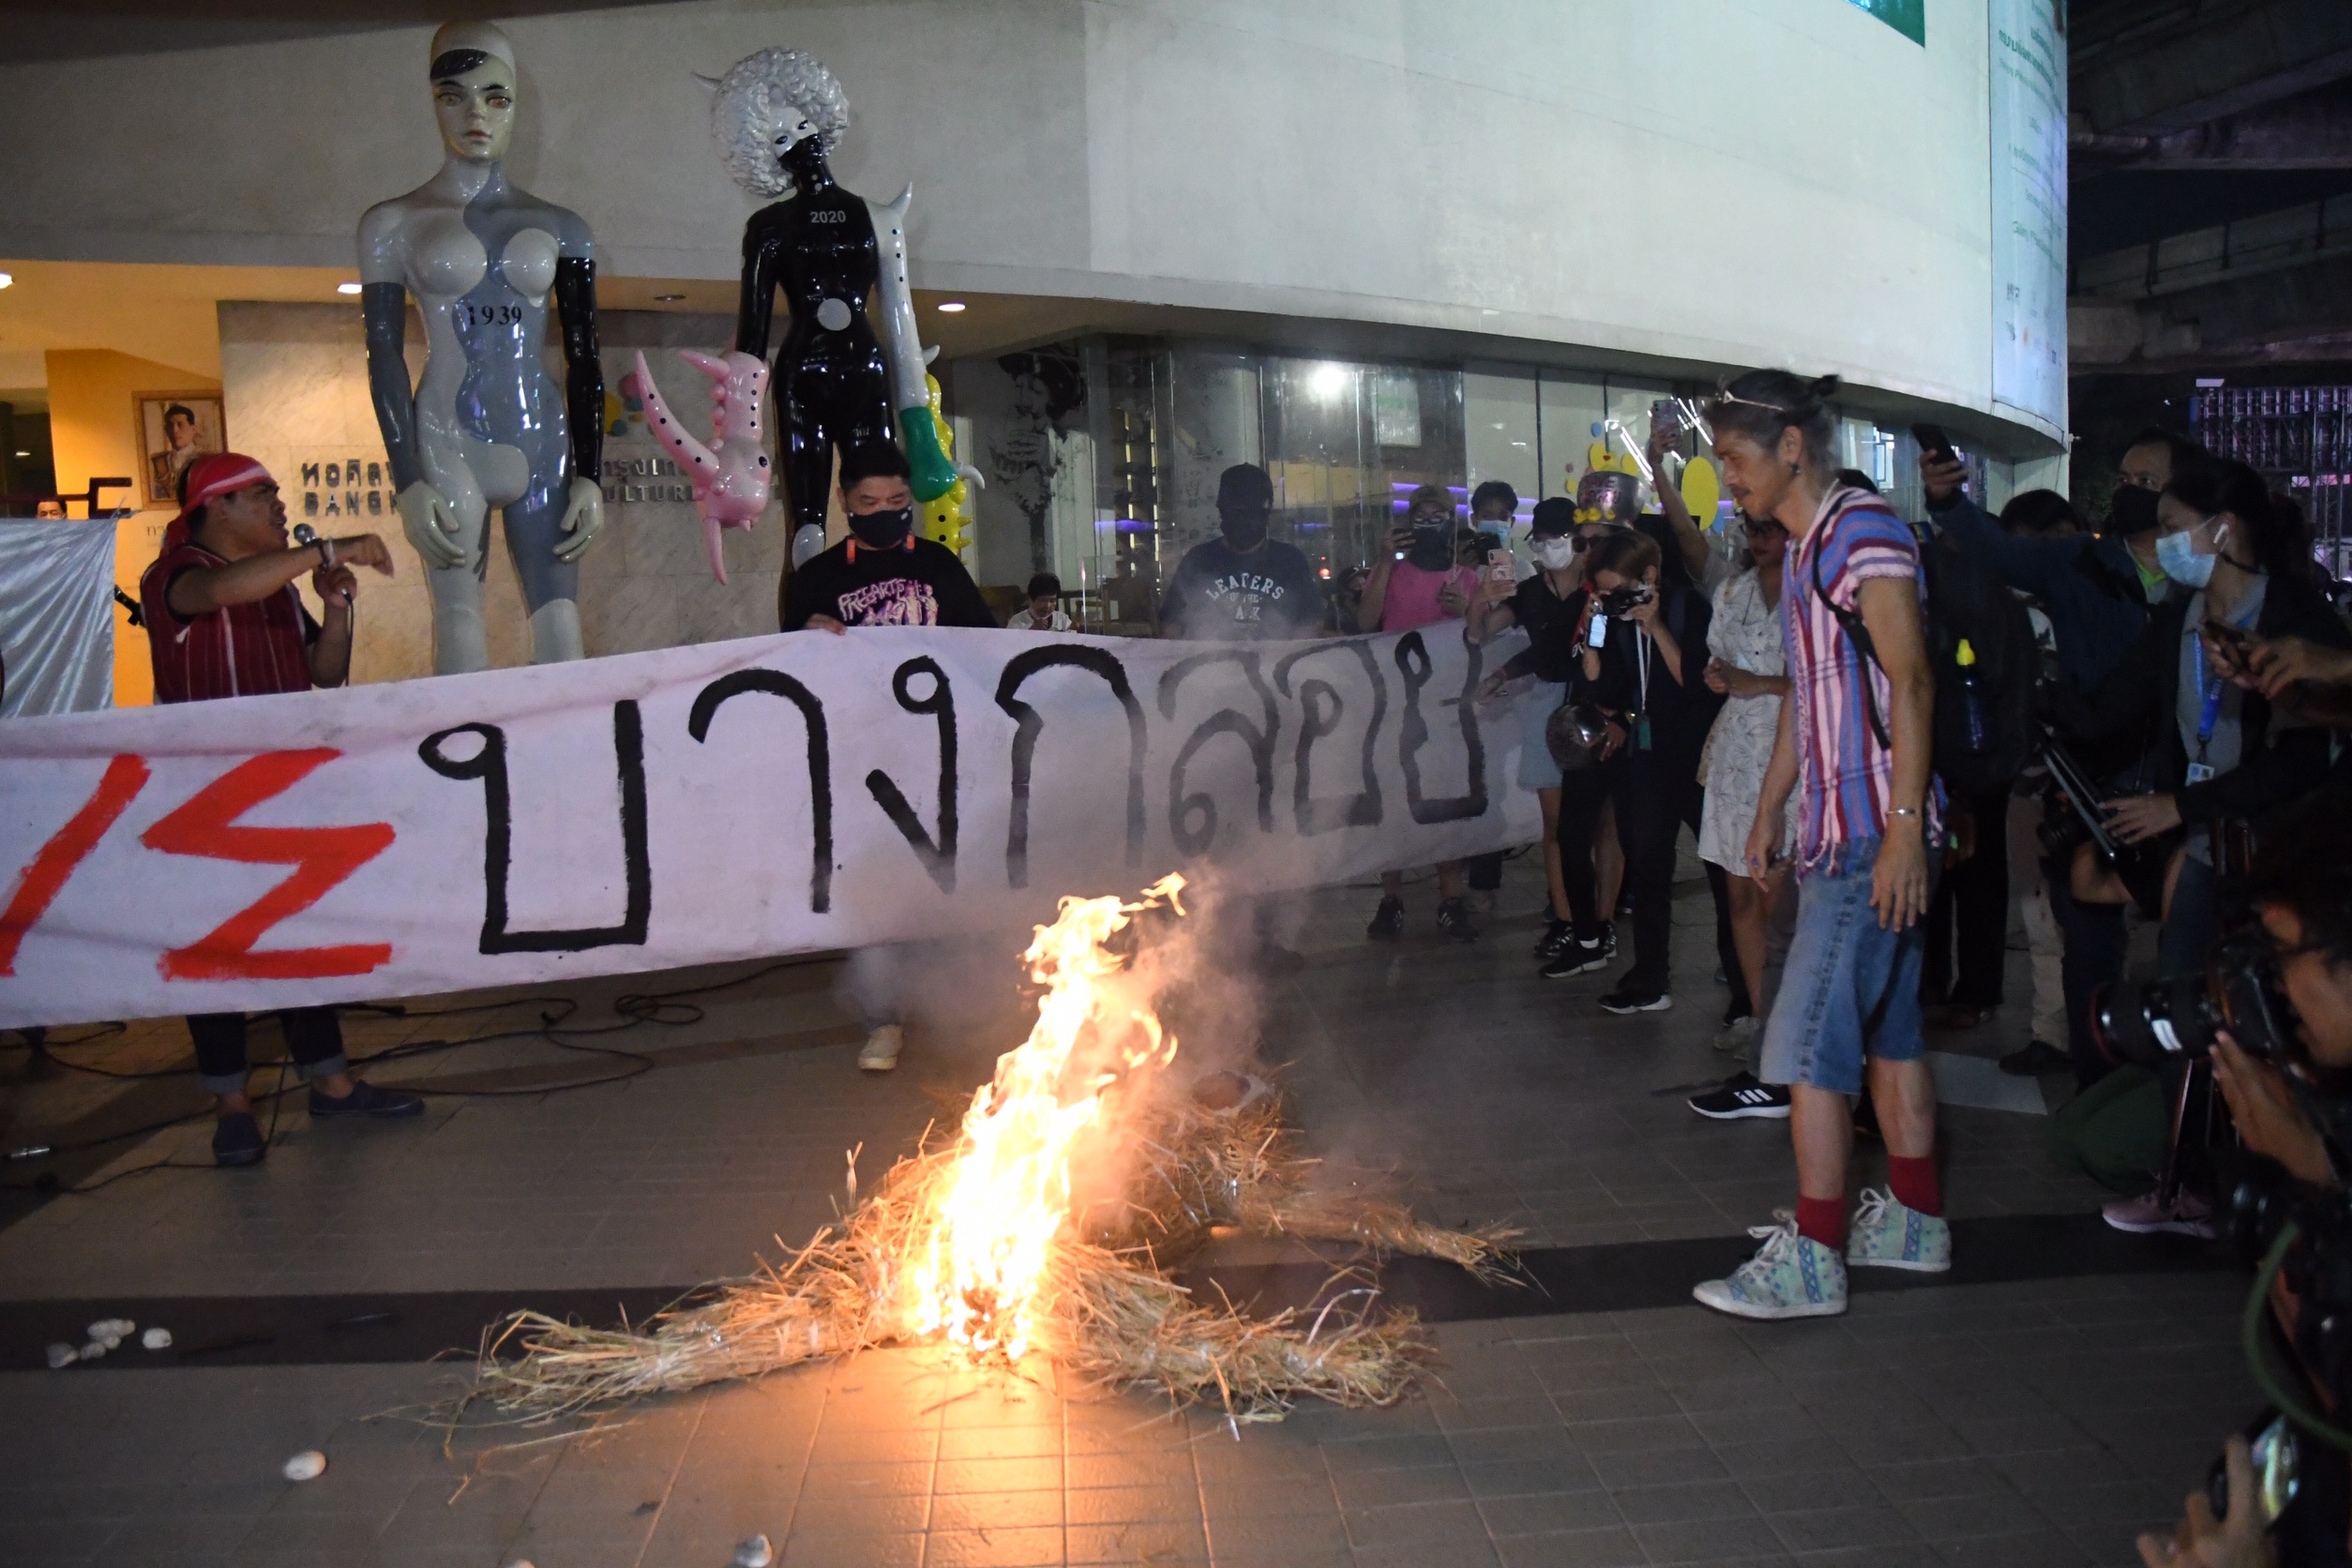 An activist sets fire to an effigy of environmental minister Varawut Silpa-archa during a protest in front of the Bangkok Arts and Cultural Center on Feb. 22, 2021.